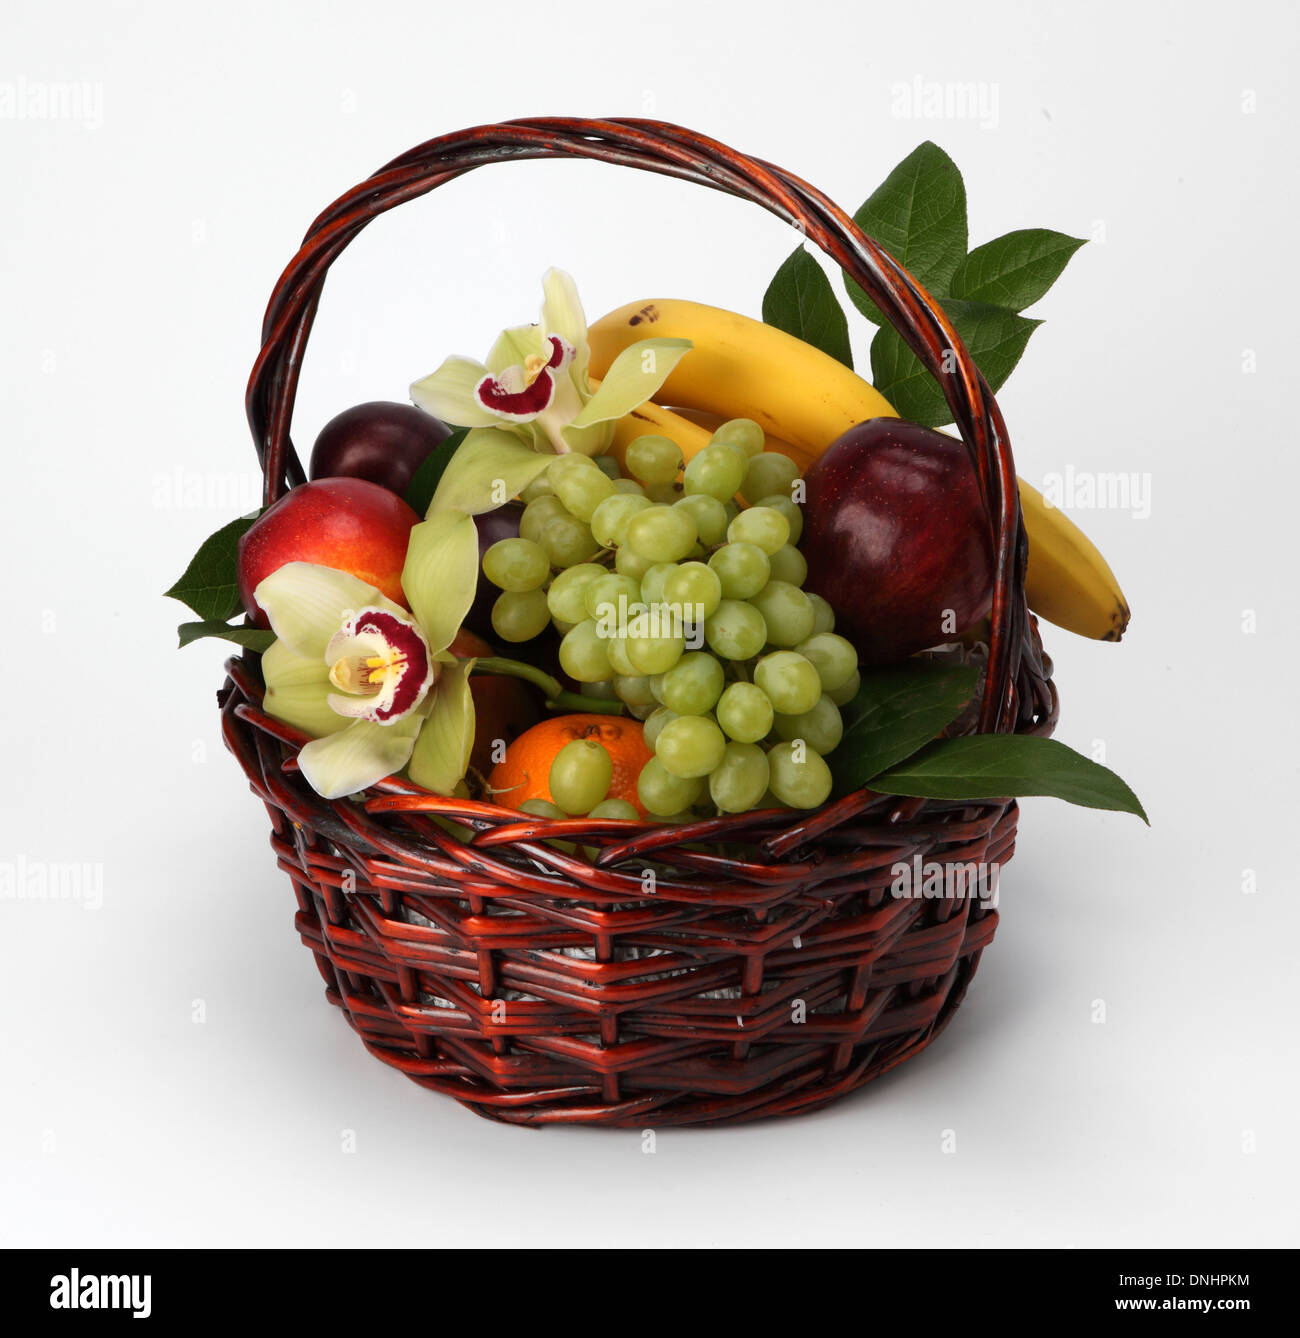 A basket filled with assorted fruit on a white background Stock Photo